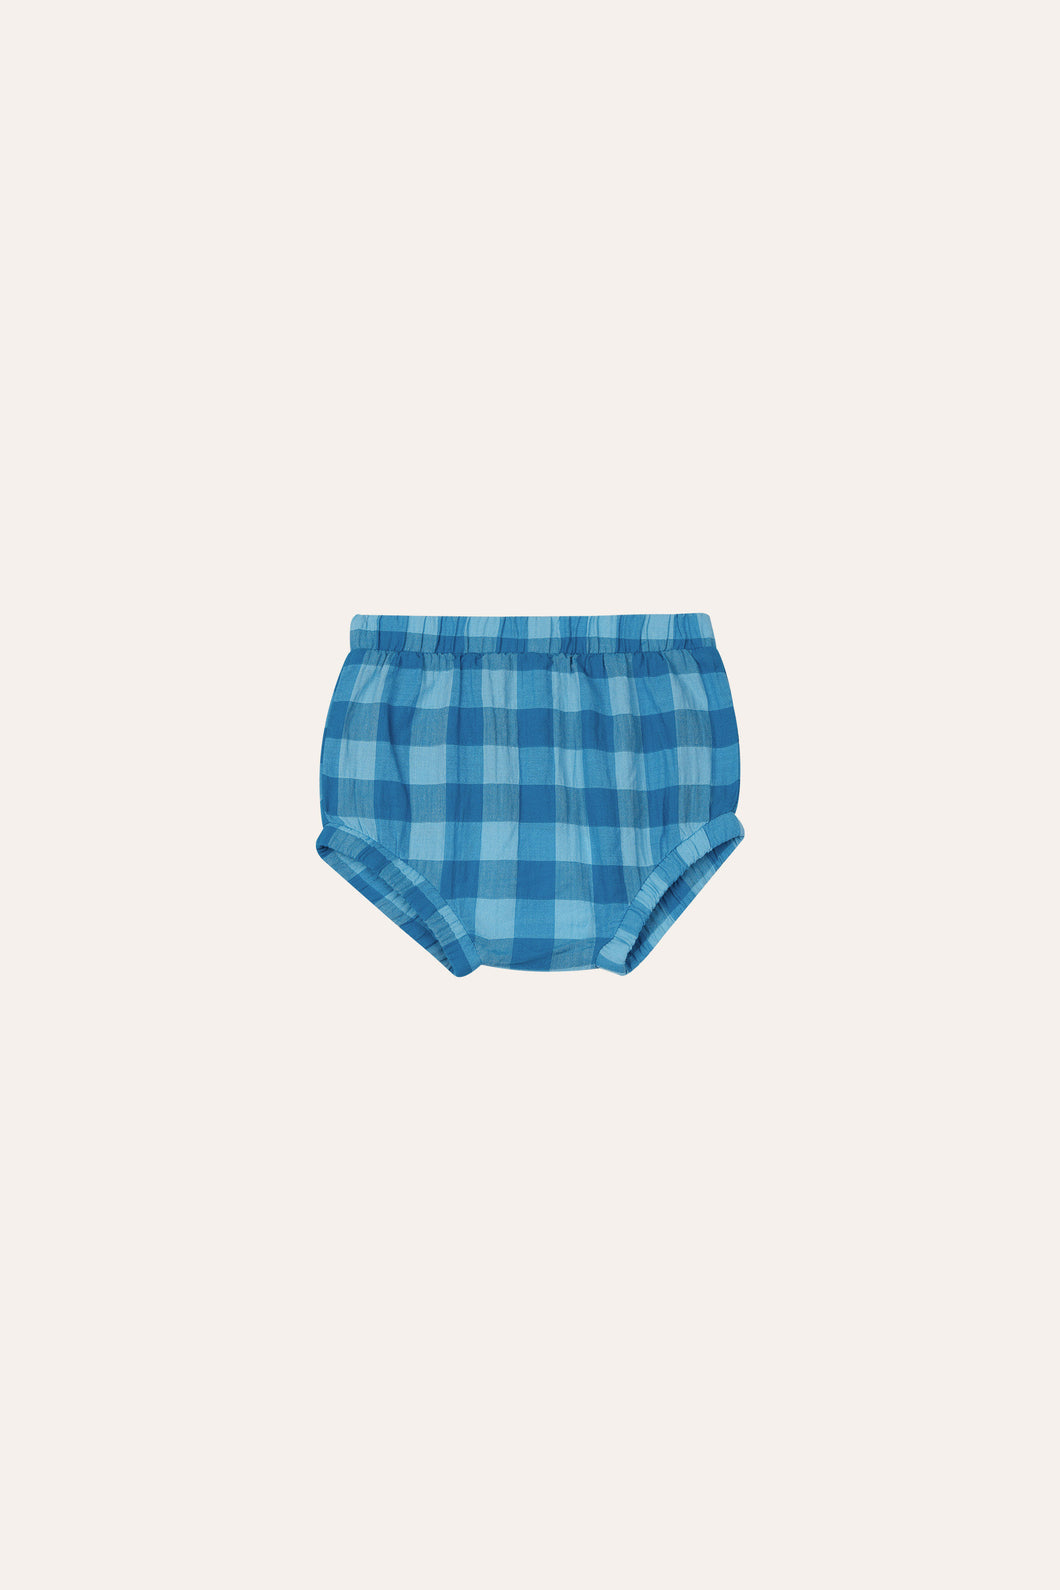 The Campamento / BABY / Blue Checked Bloomer